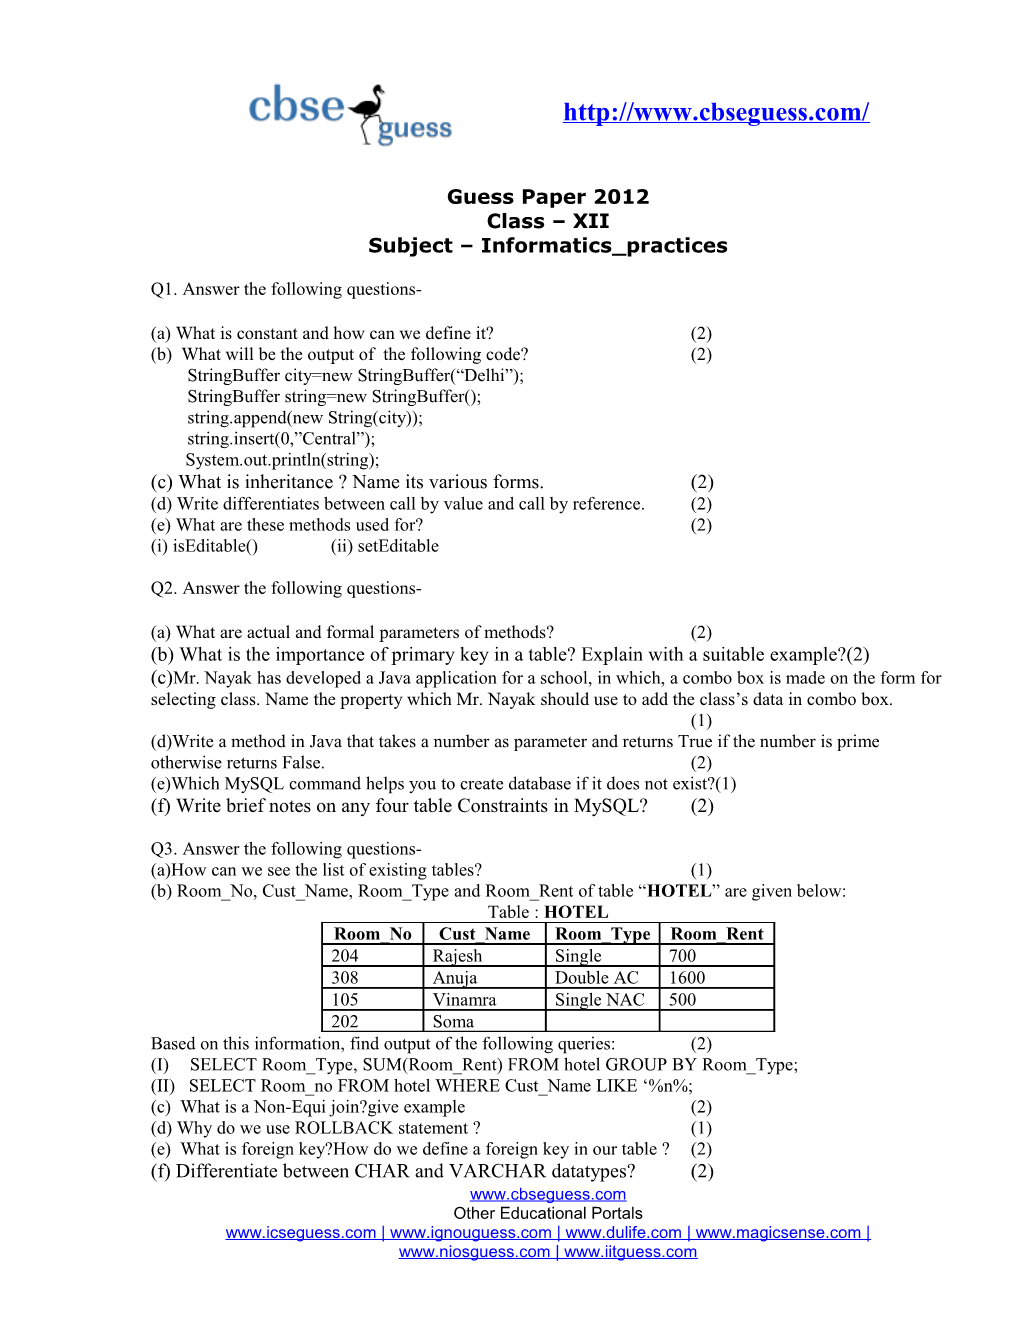 Guess Paper 2012 Class XII Subject Informatics Practices